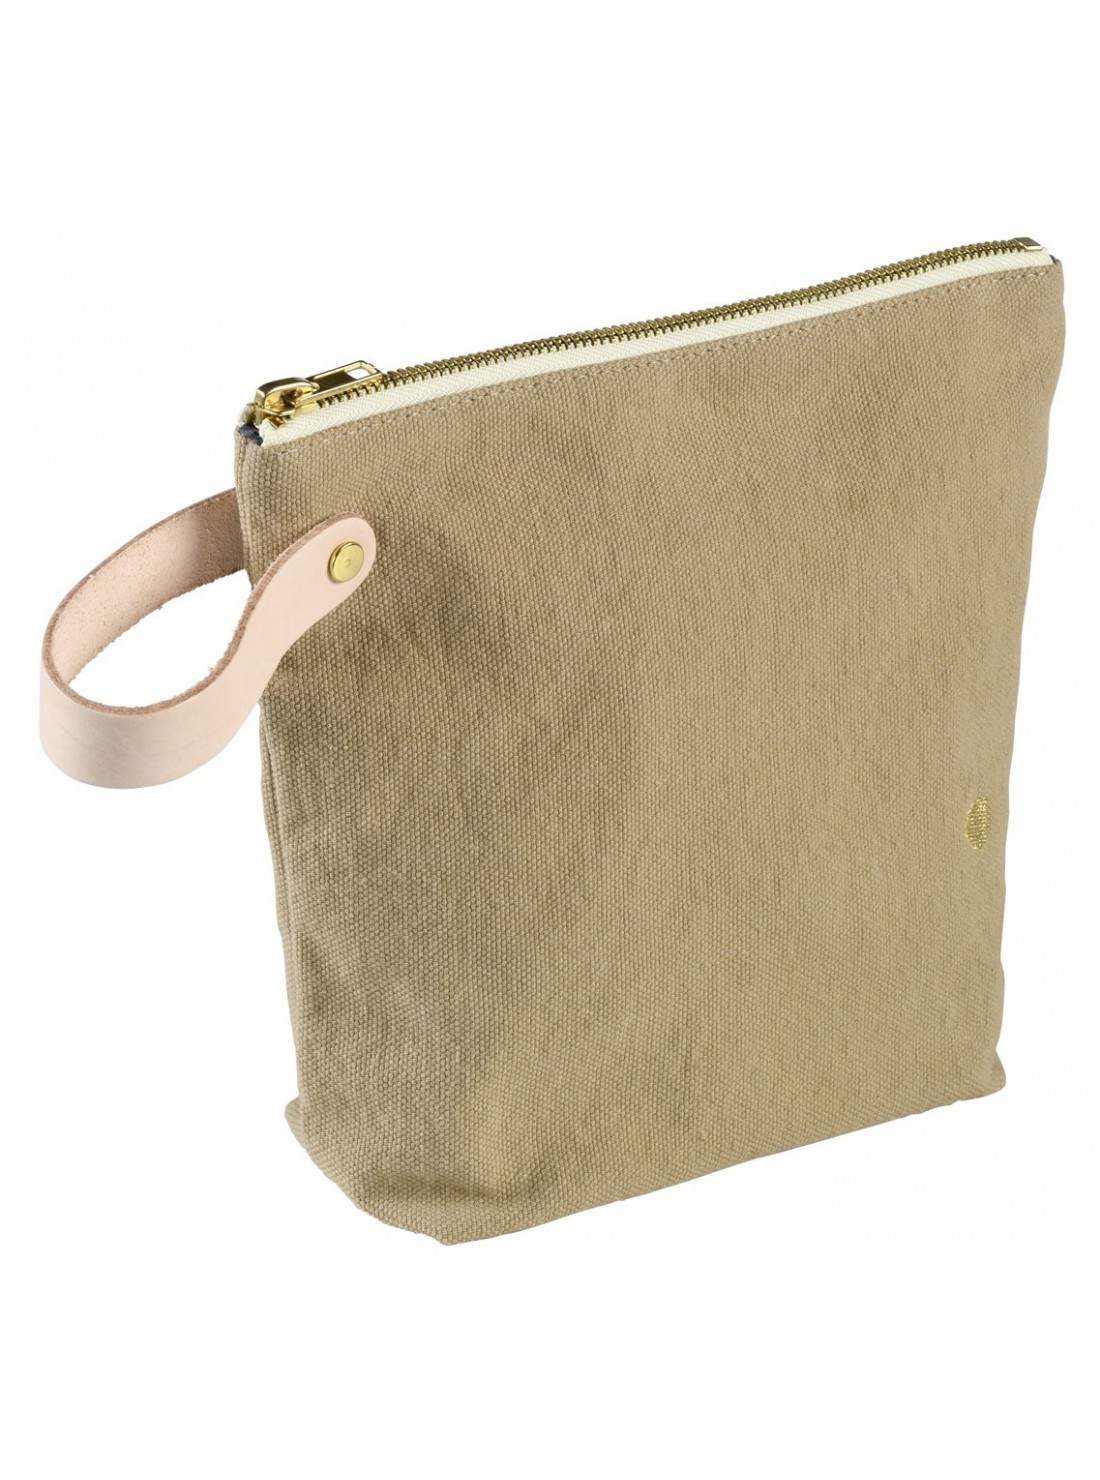 TOILETRY BAG IONA GINGER PM